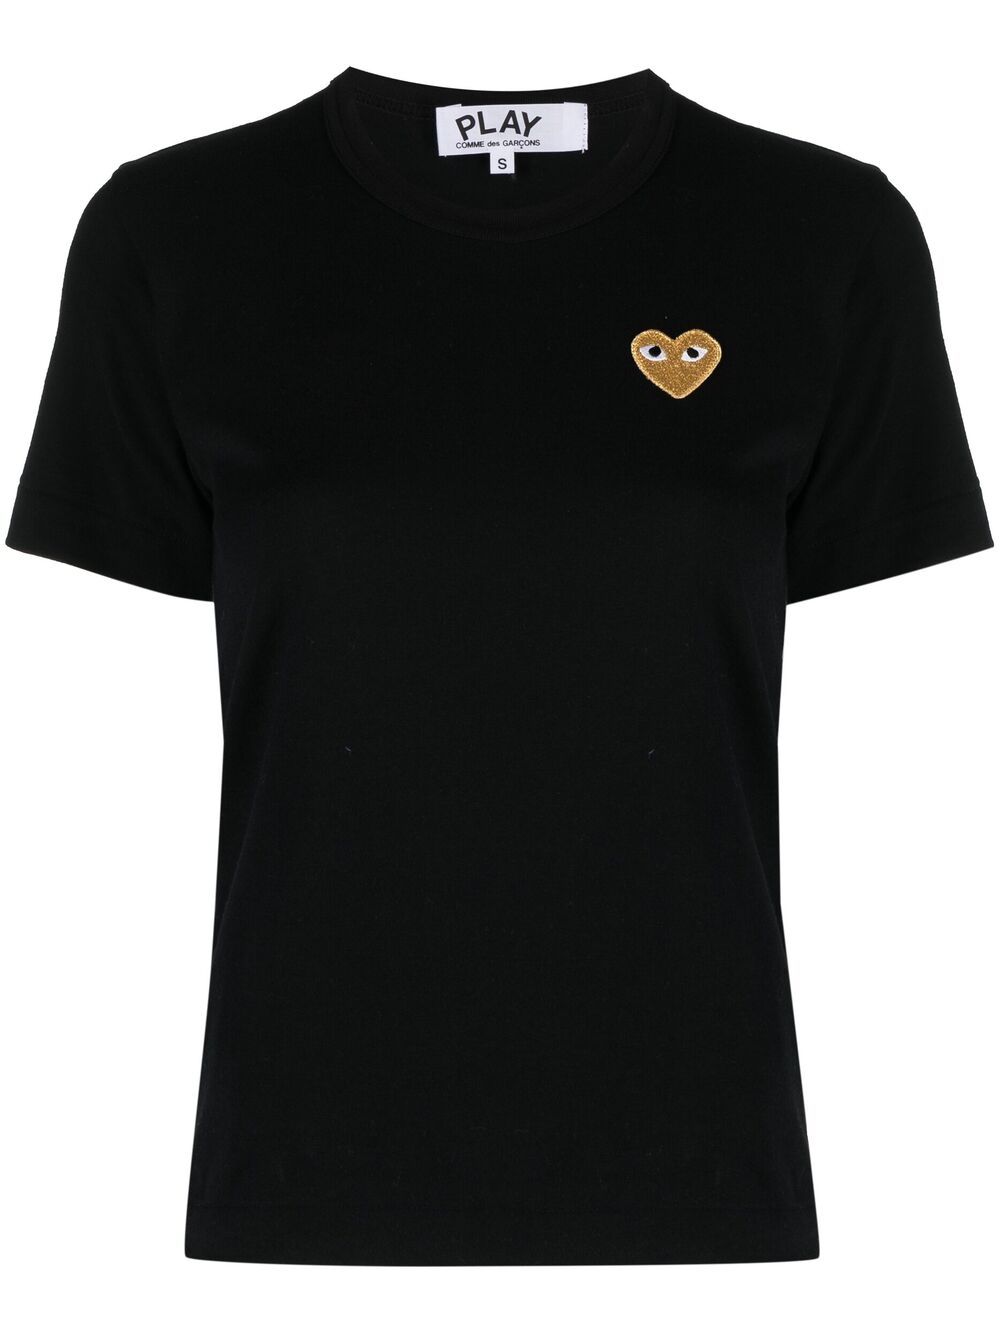 Comme Des Garçons Play embroidered heart T-shirt - Black von Comme Des Garçons Play